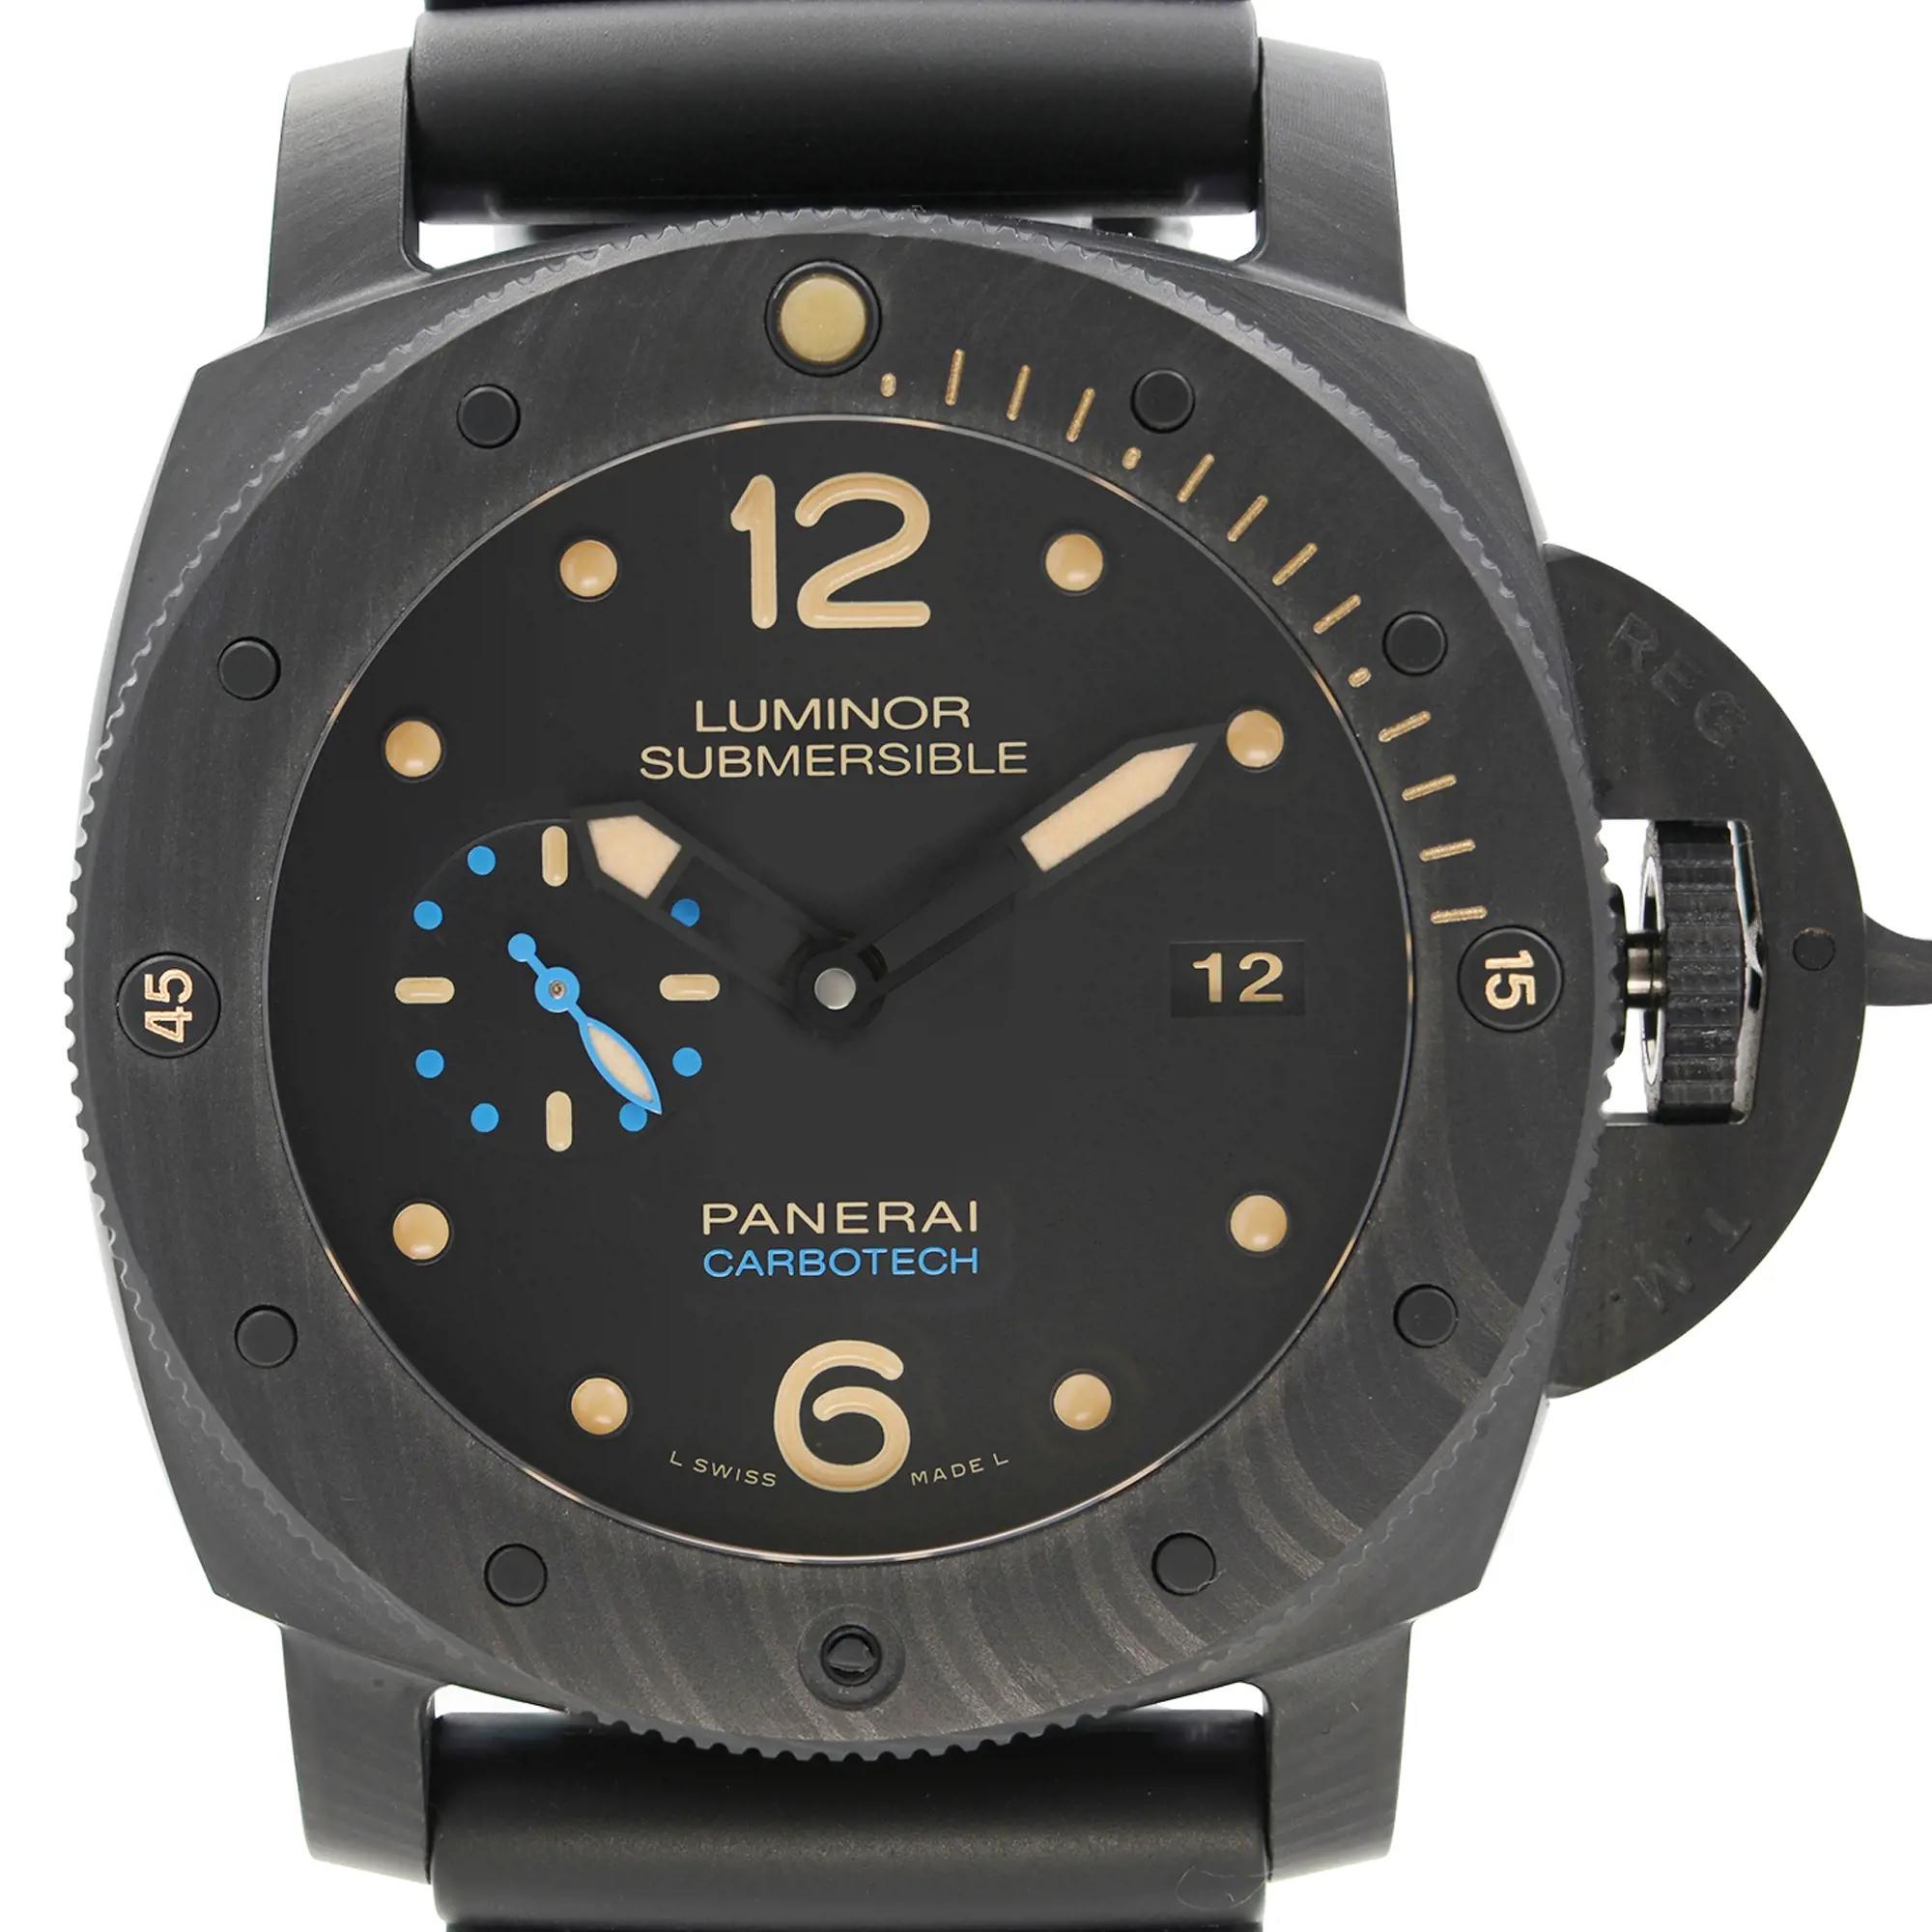 Pre-owned and in good condition. The watch has insignificant imperfections on the case due to being used. The buckle has scuffs and minor scratches. Comes with the original box and papers.

Brand: Panerai  Type: Wristwatch  Department: Men  Model